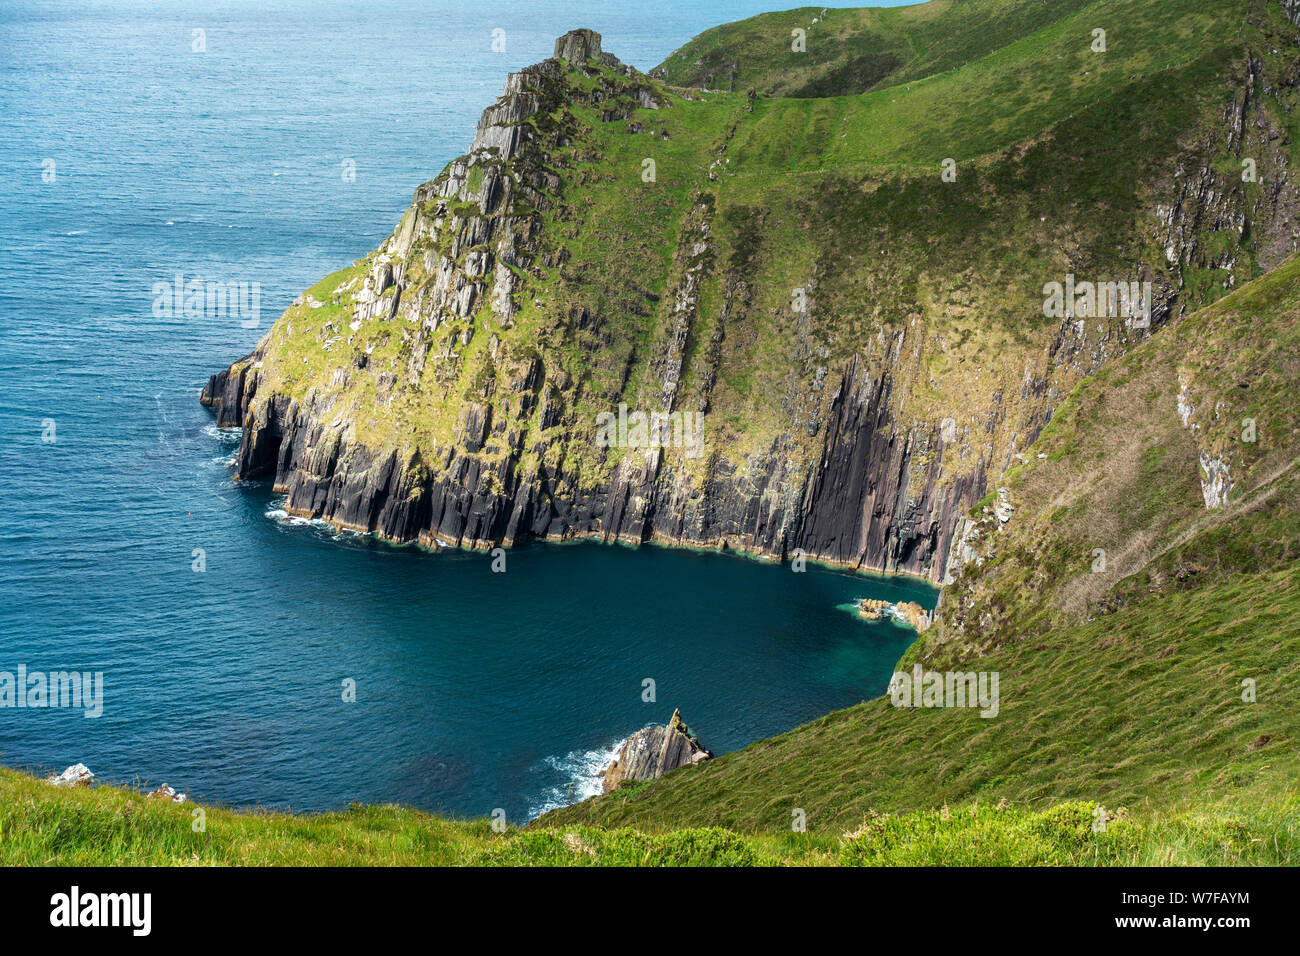 Sheltered bay below Eask Tower on Ballymacadoyle Hill on the Dingle Peninsula, County Kerry, Republic of Ireland Stock Photo